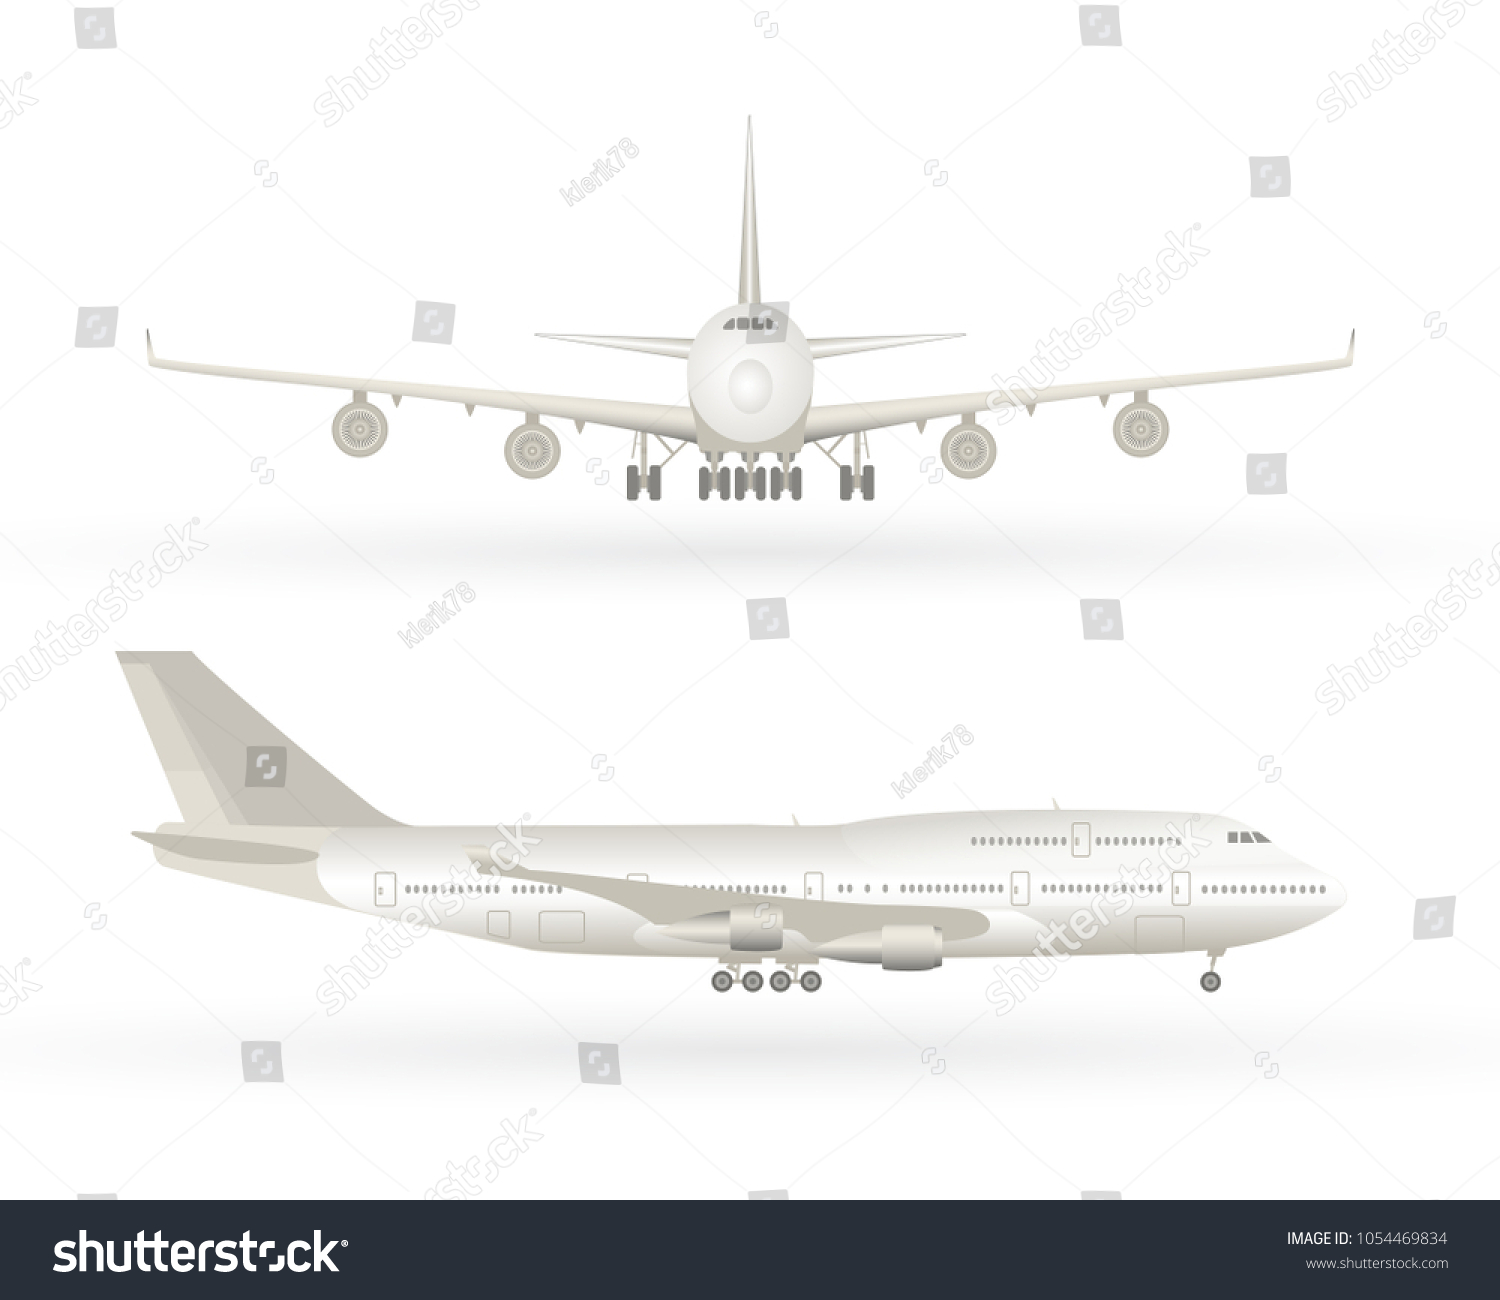 SVG of Big commercial jet airplane. Airplane in profile, from the front view. Aeroplane isolated. Aircraft vector illustration. Airline Concept Travel Passenger plane set. Jet commercial airplane. svg